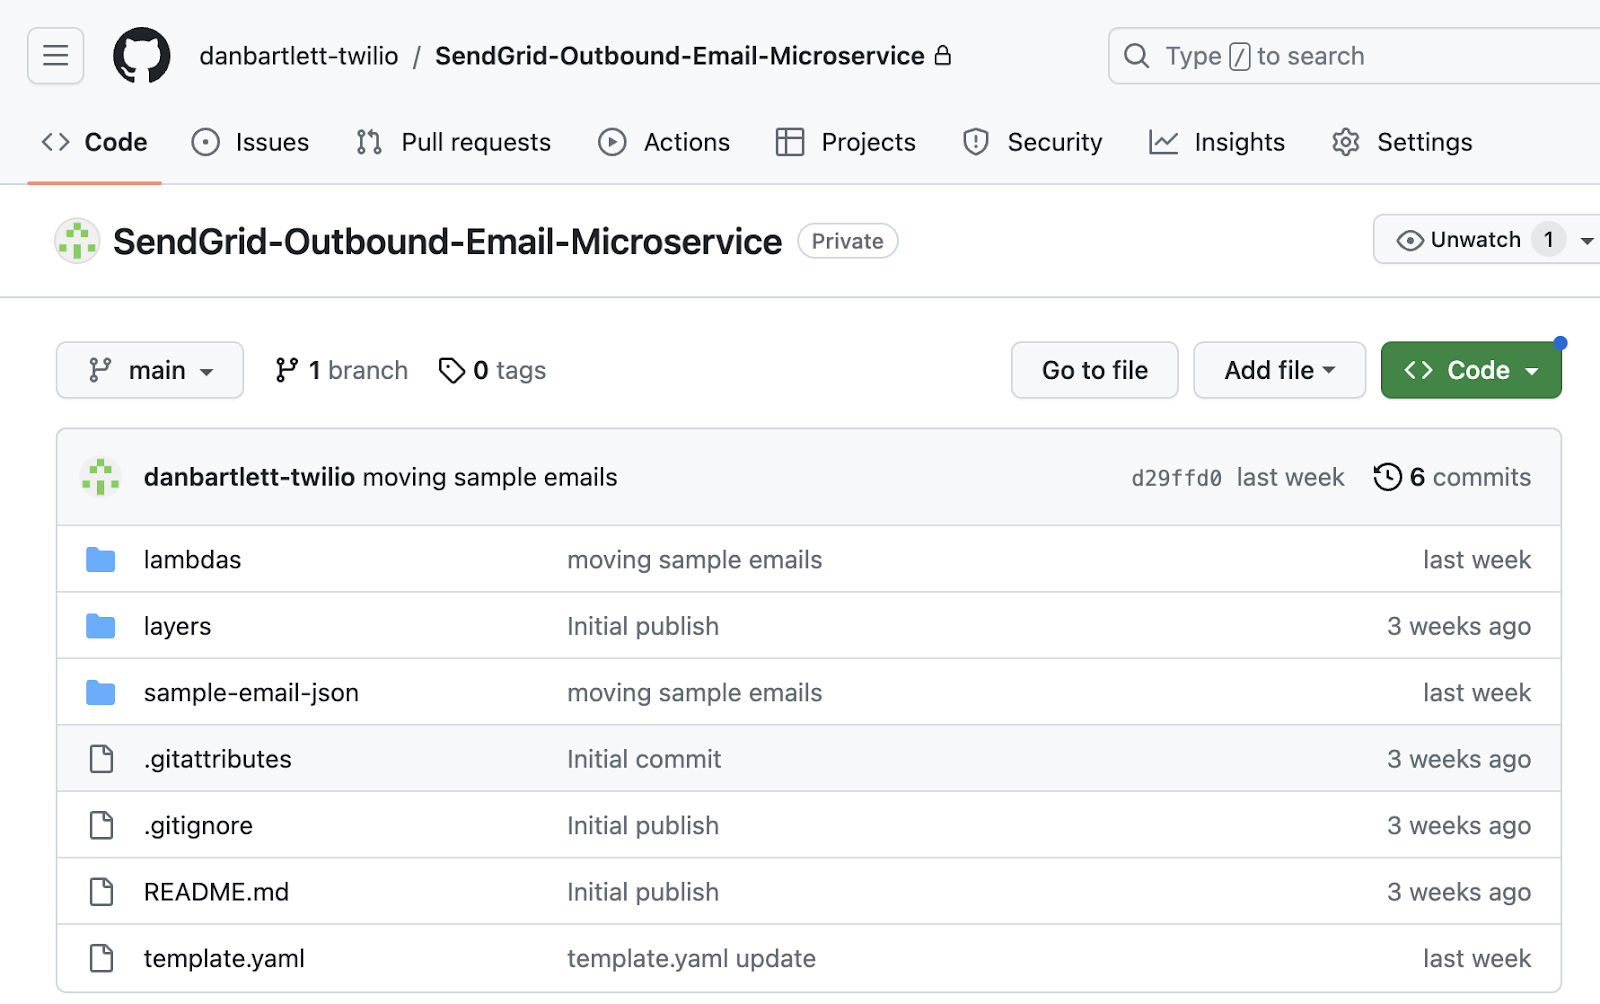 Repo code for AWS microservice to send SendGrid emails